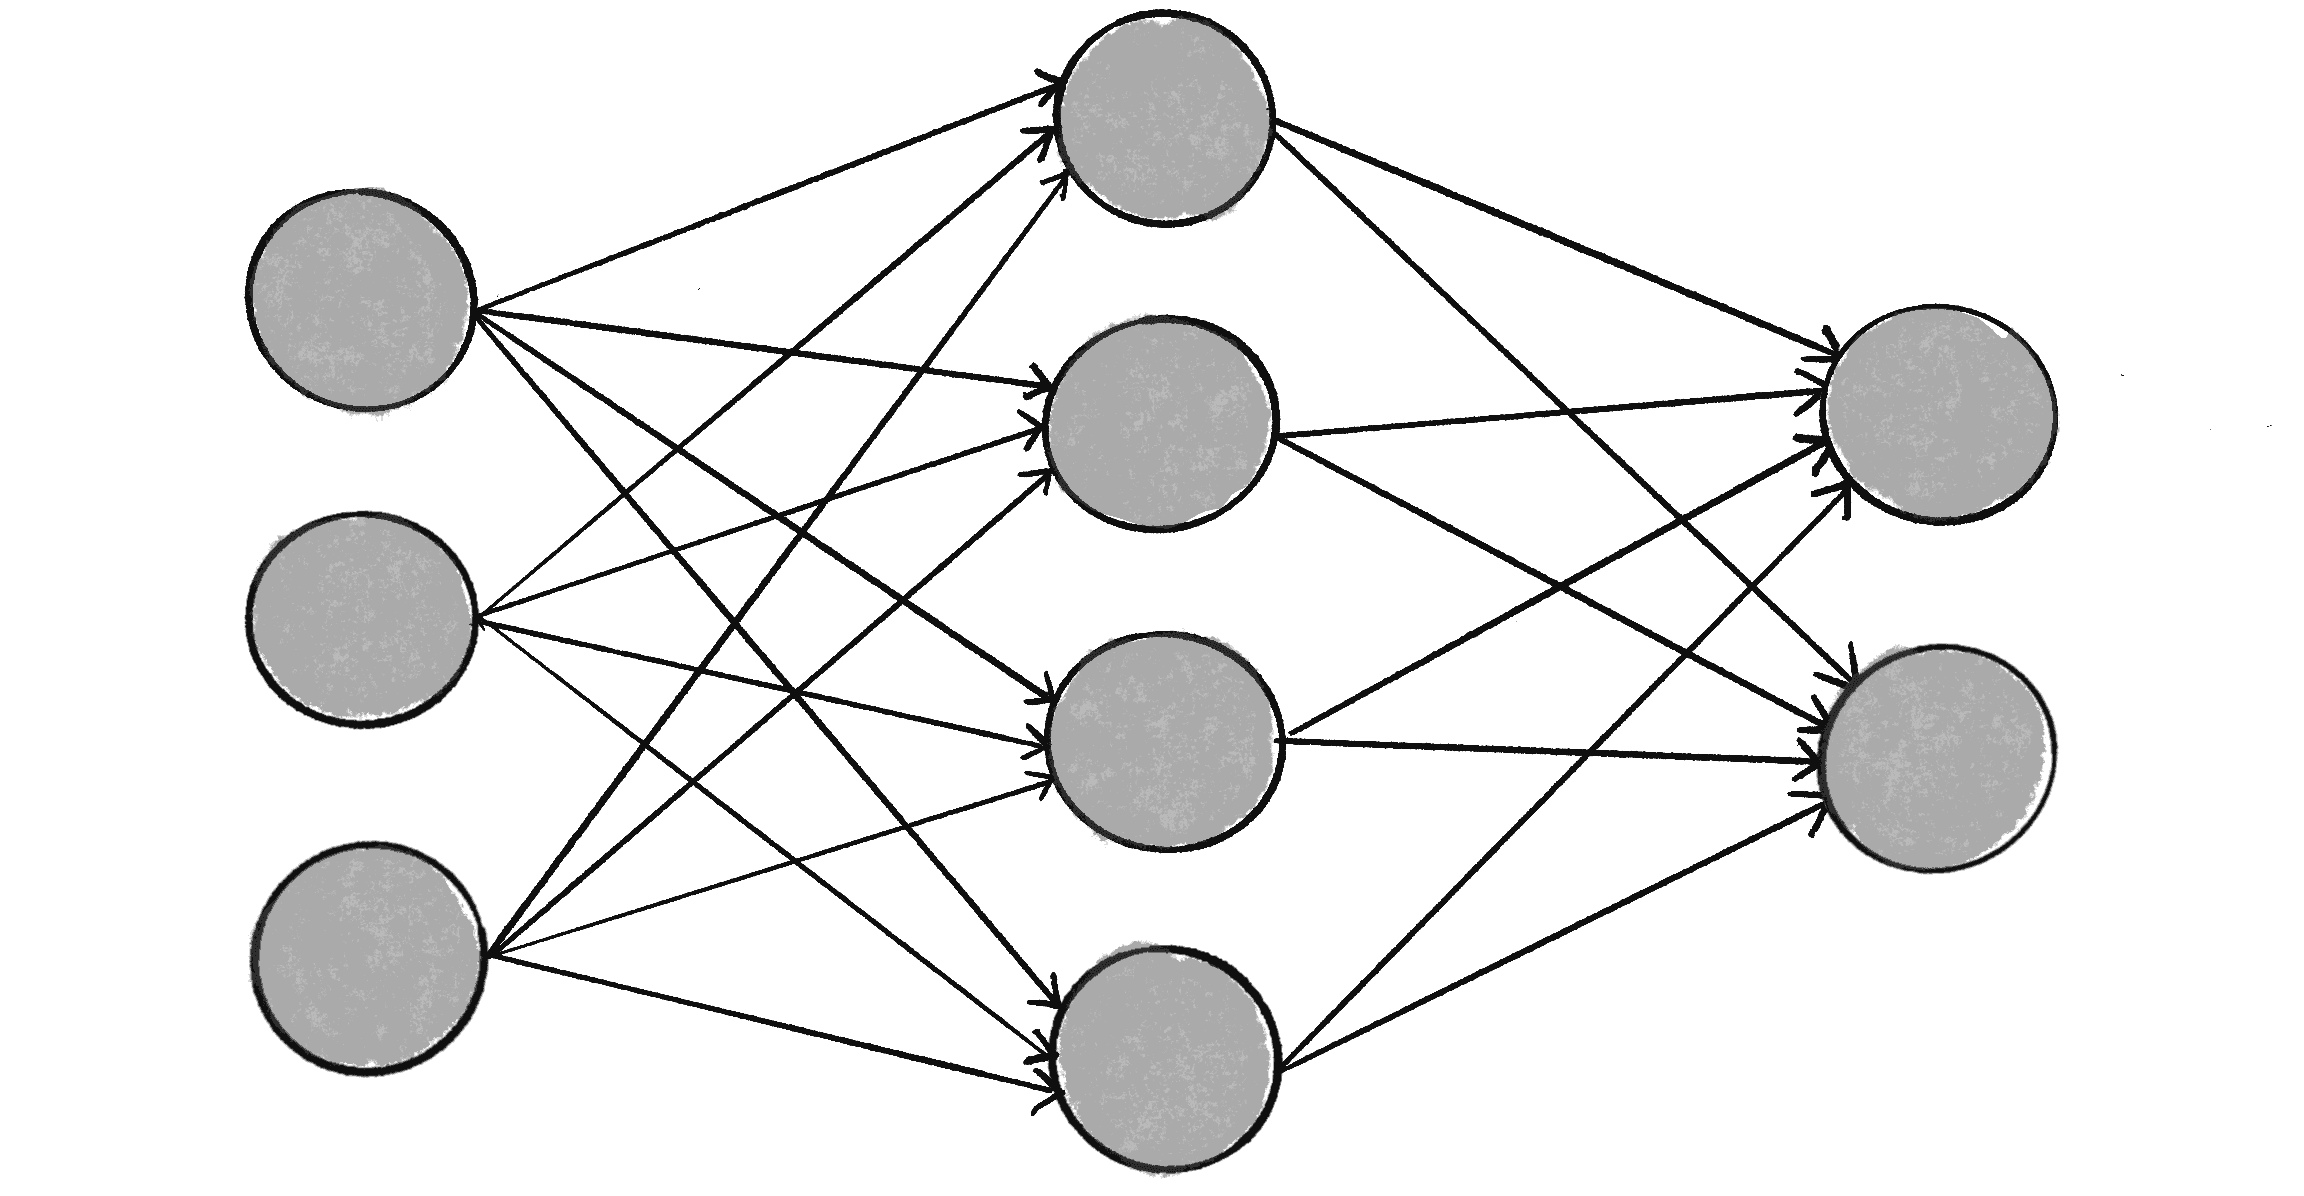 Figure 10.2: A neural network is a system of neurons and connections.